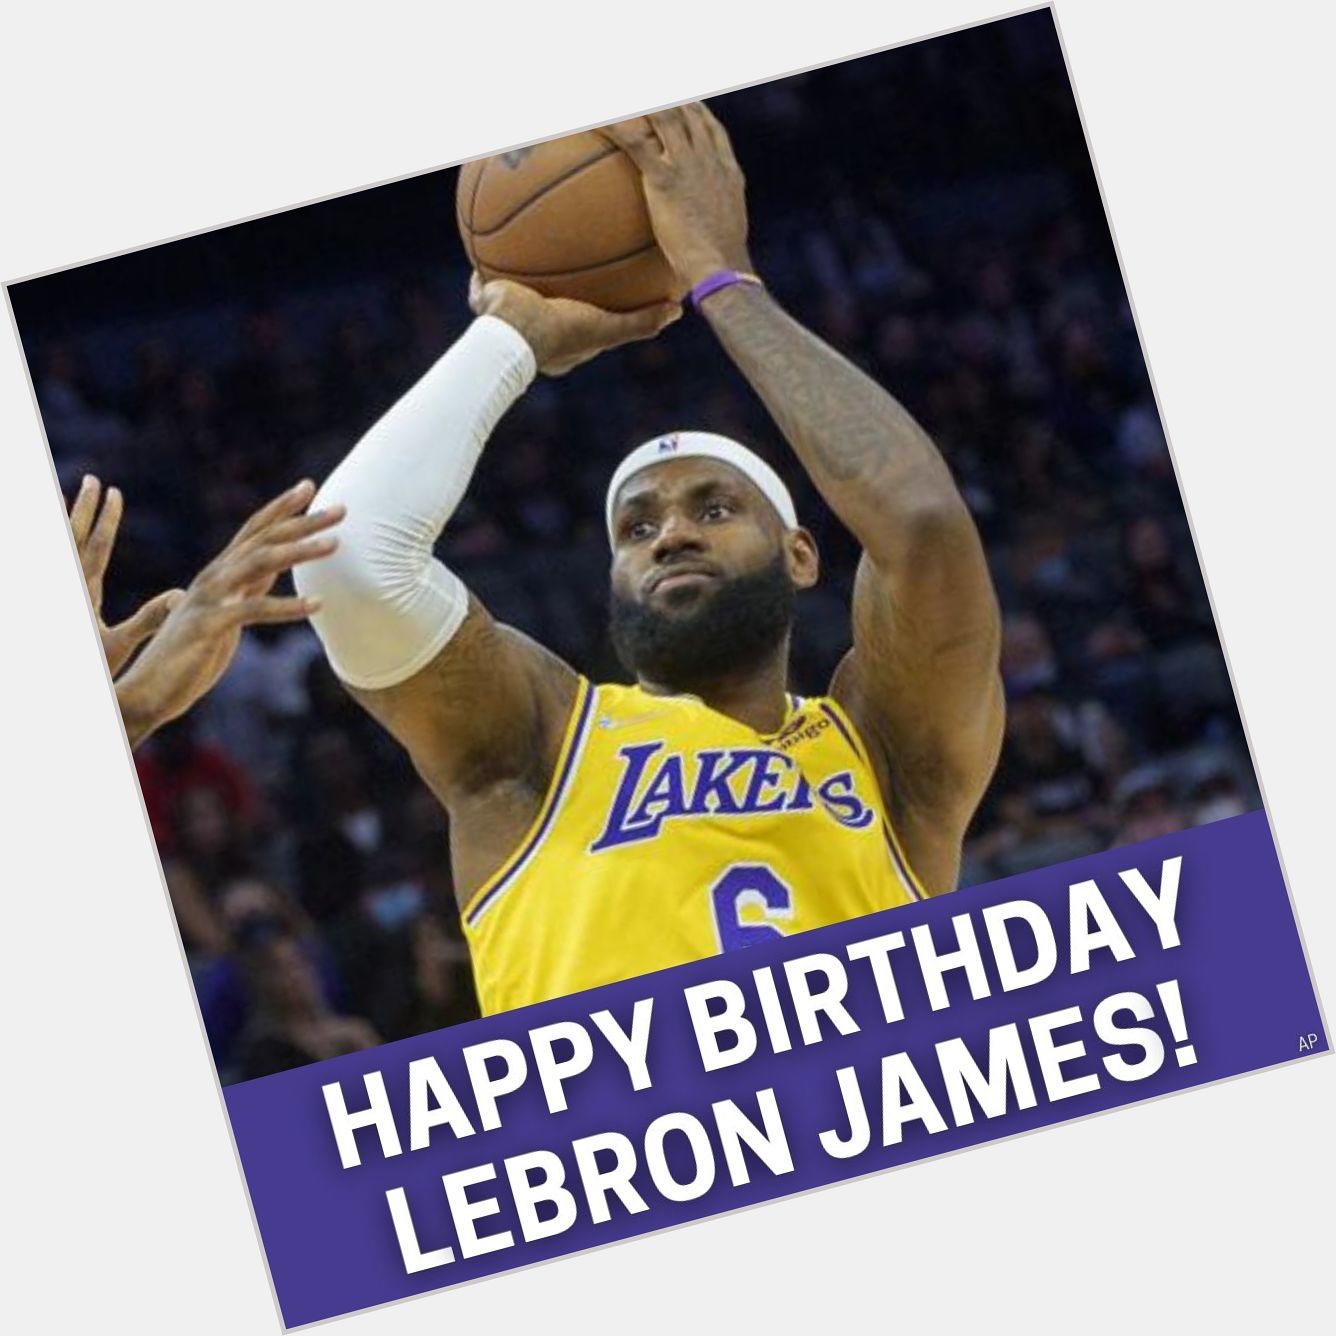 HAPPY BIRTHDAY! NBA star LeBron James turns 37 years old today!

Has he surpassed Michael Jordan as the GOAT?  